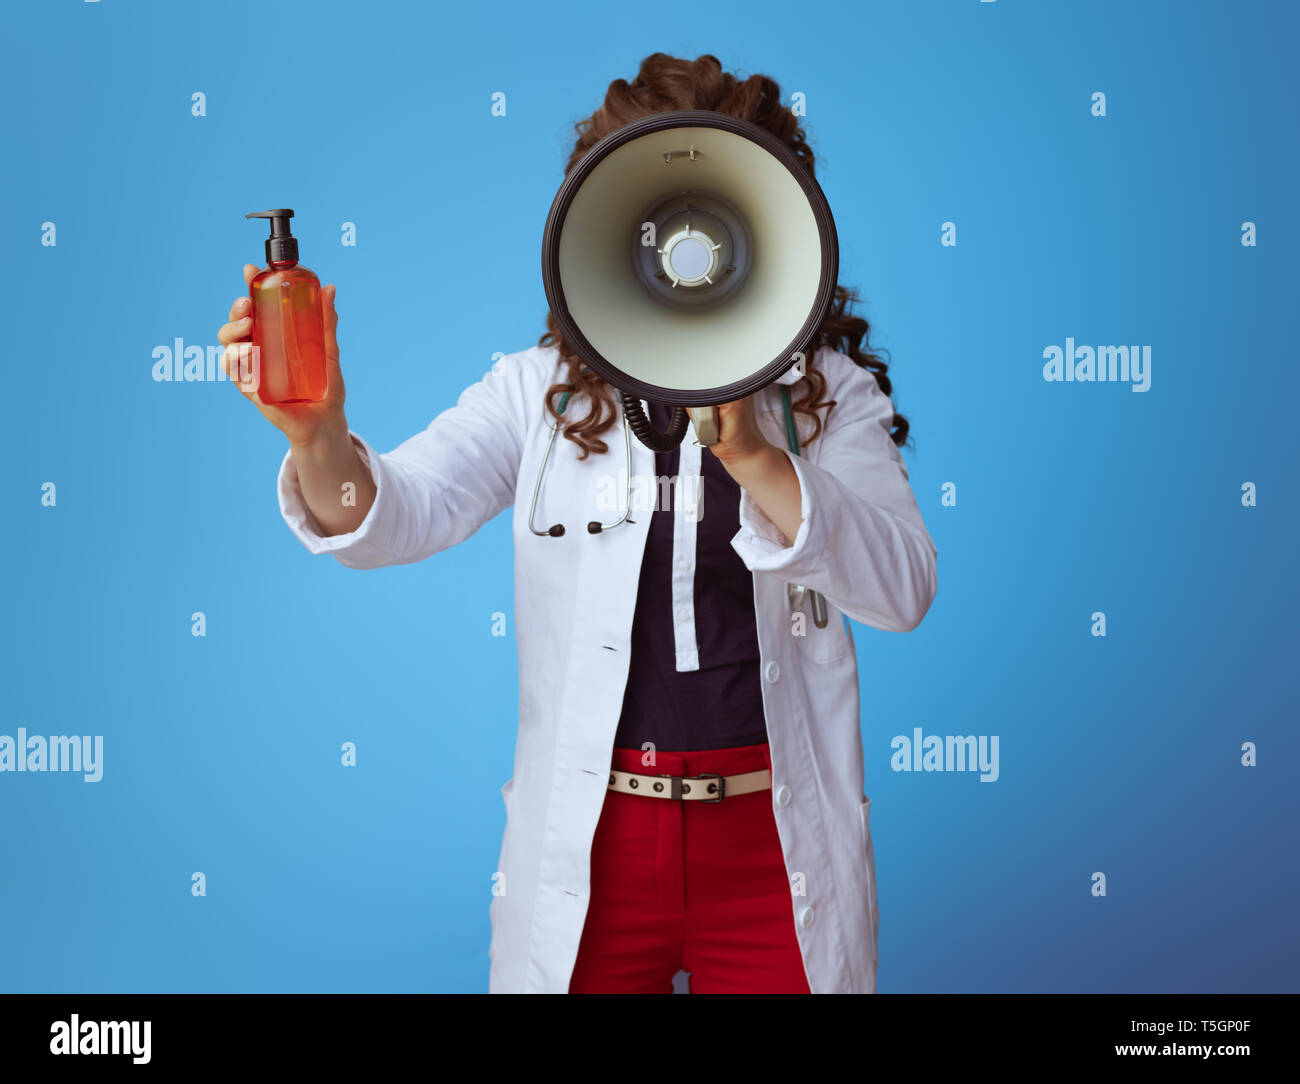 elegant medical doctor woman in bue shirt, red pants and white medical robe with megaphone showing sun cream on blue background. Stock Photo